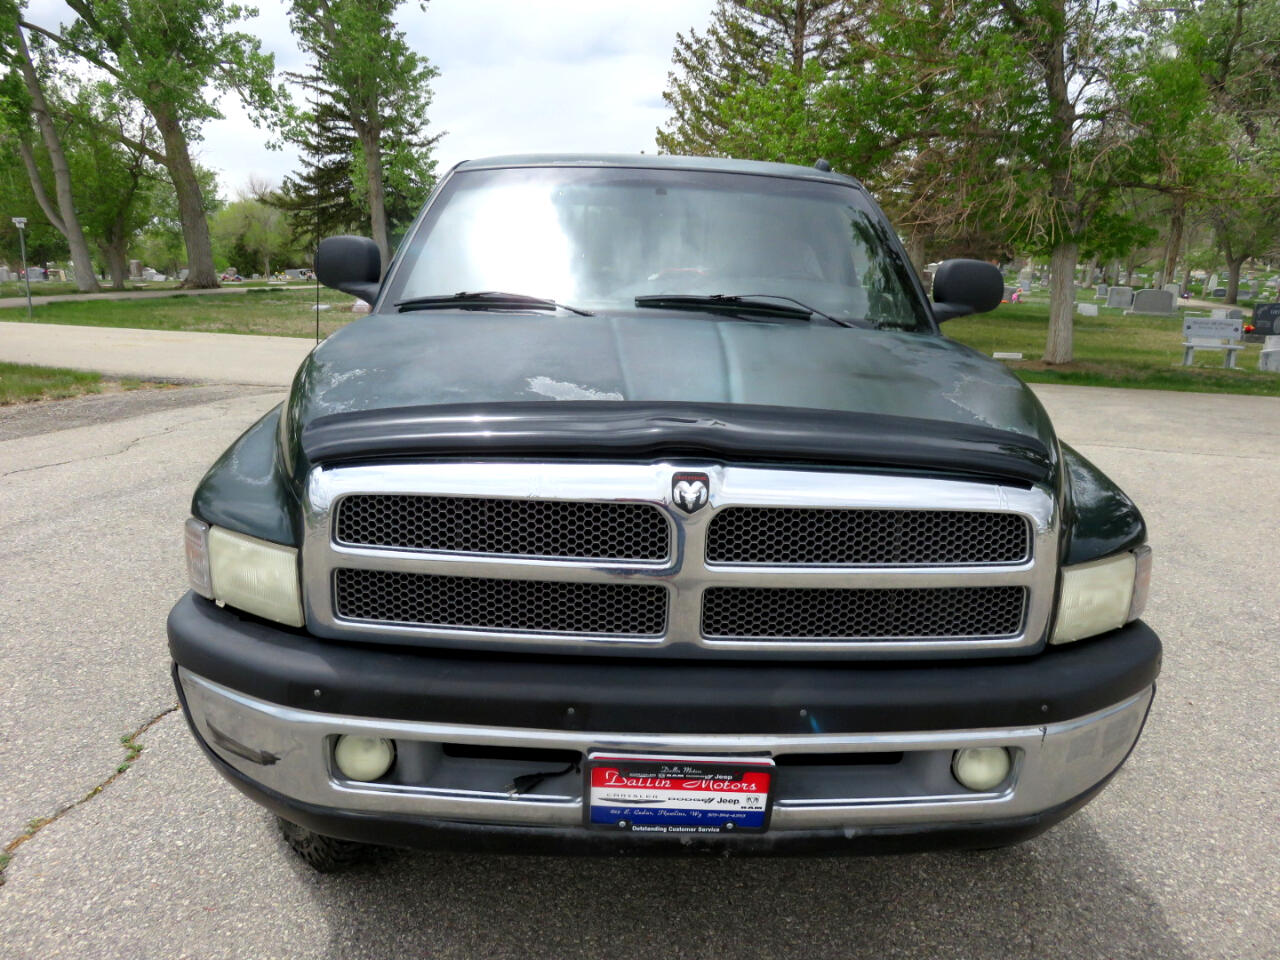 Used 2001 Dodge Ram Pickup SLT+ with VIN 3B7HF13Z01G225887 for sale in Rawlins, WY